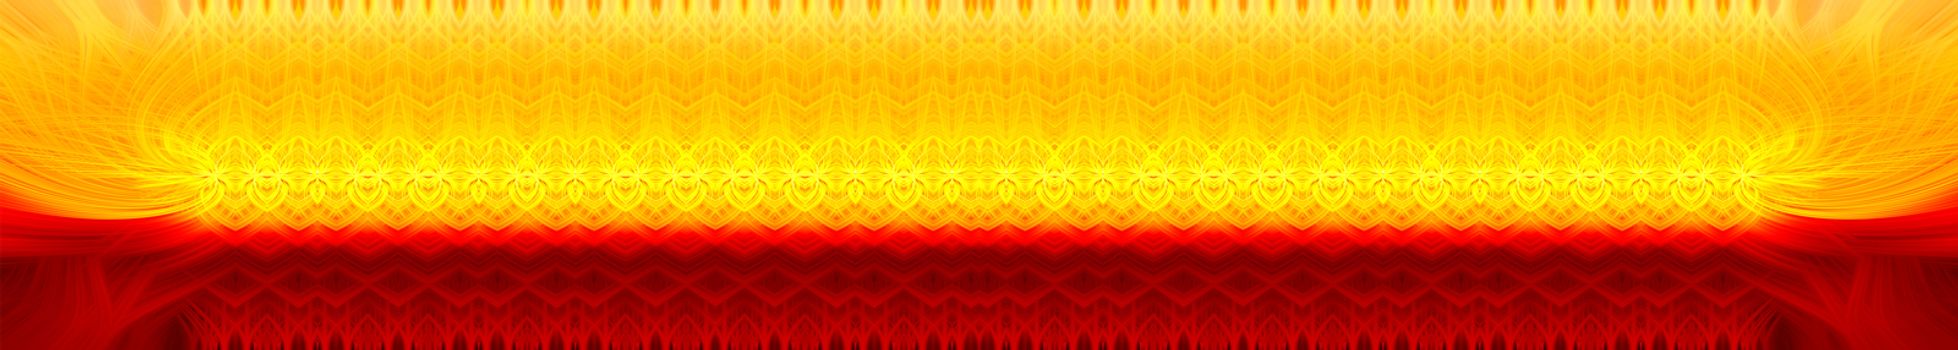 Beautiful abstract intertwined 3d fibers forming various symmetrical shapes and background pattern. Red and yellow colors. Illustration.